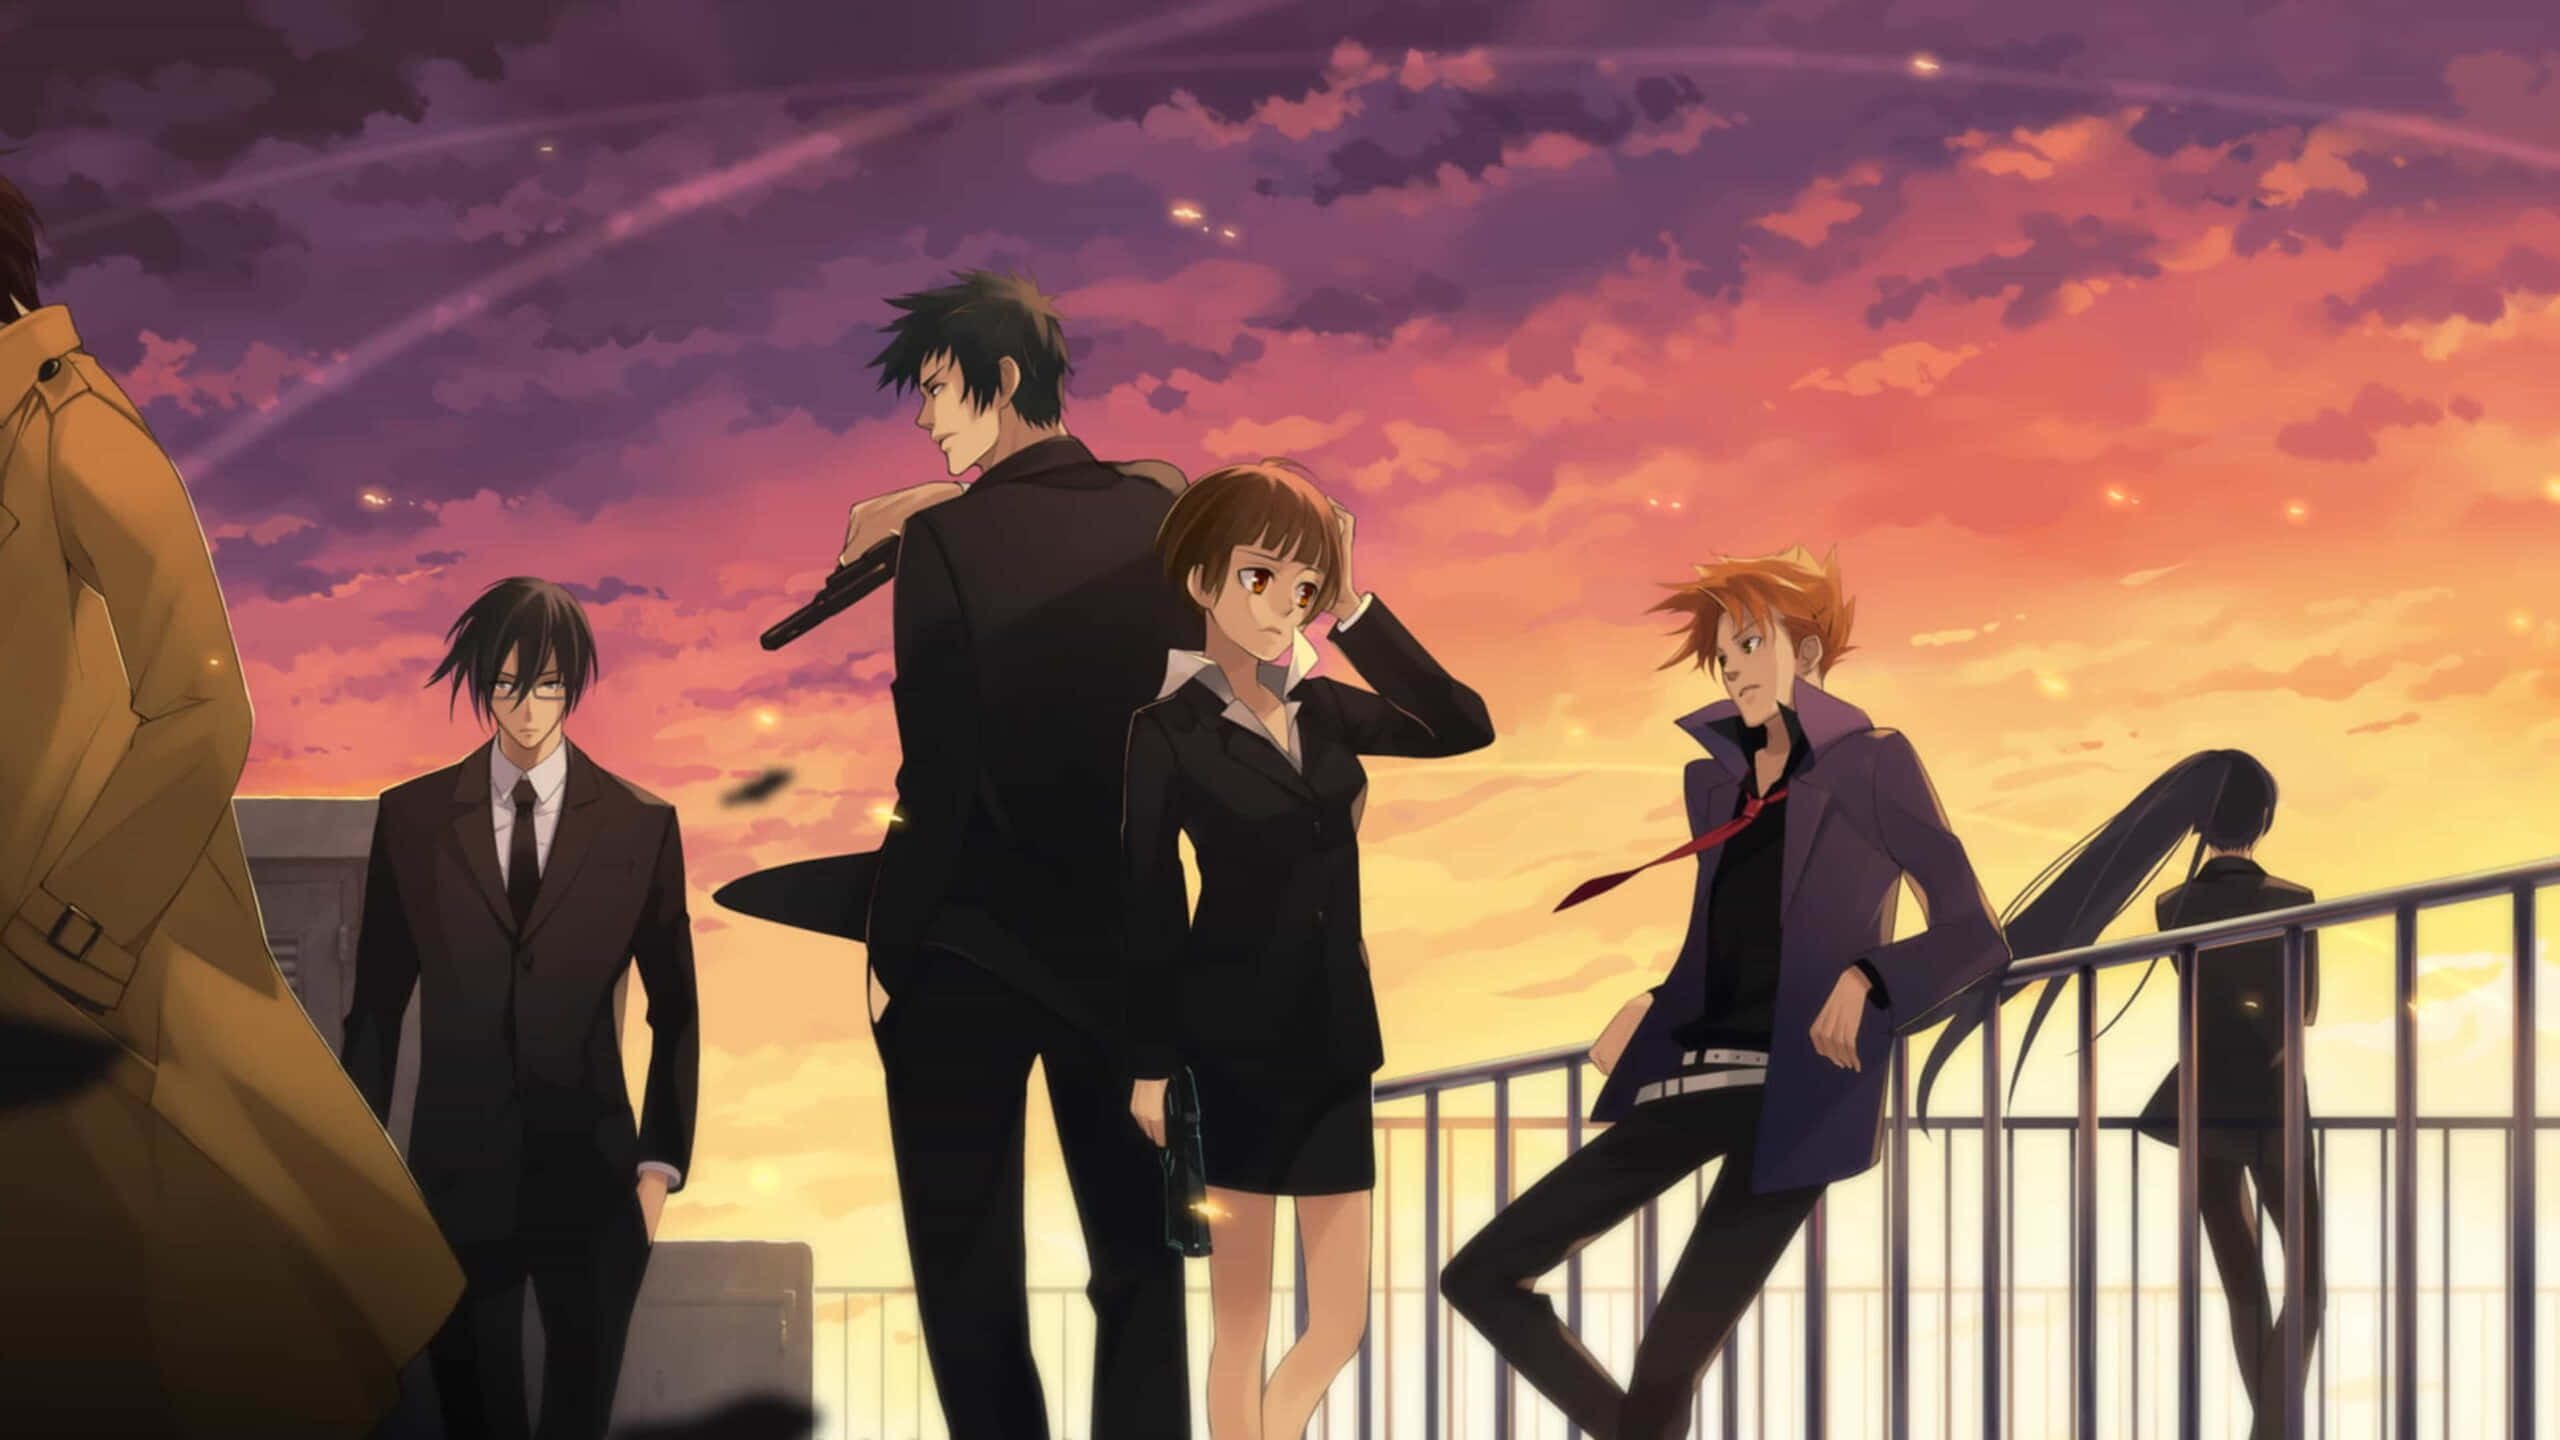 The Characters Of Psycho Pass Ready To Battle. Background